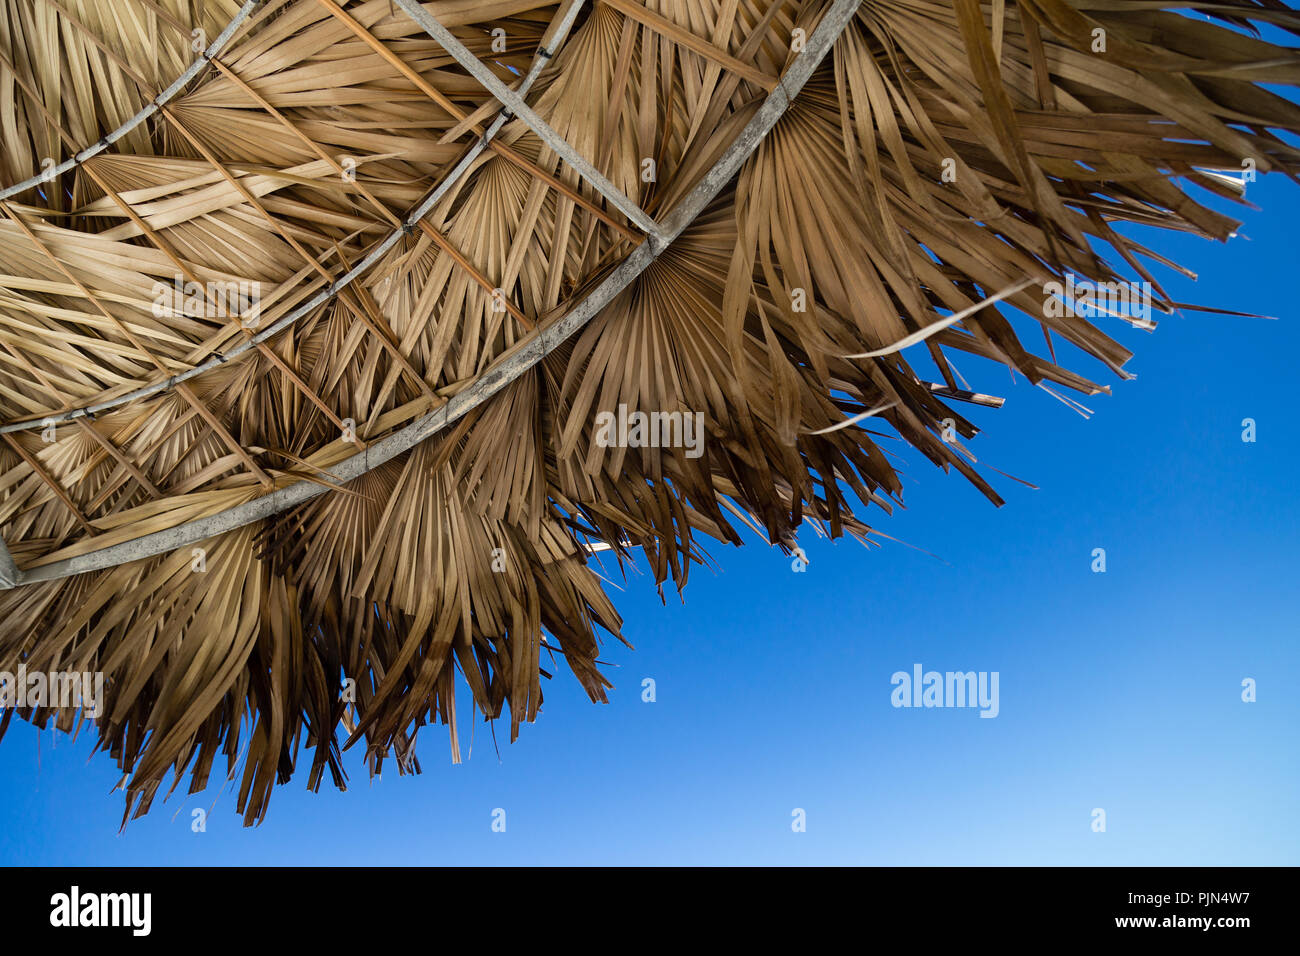 Looking up at a palapa and the blue sky relaxation Stock Photo